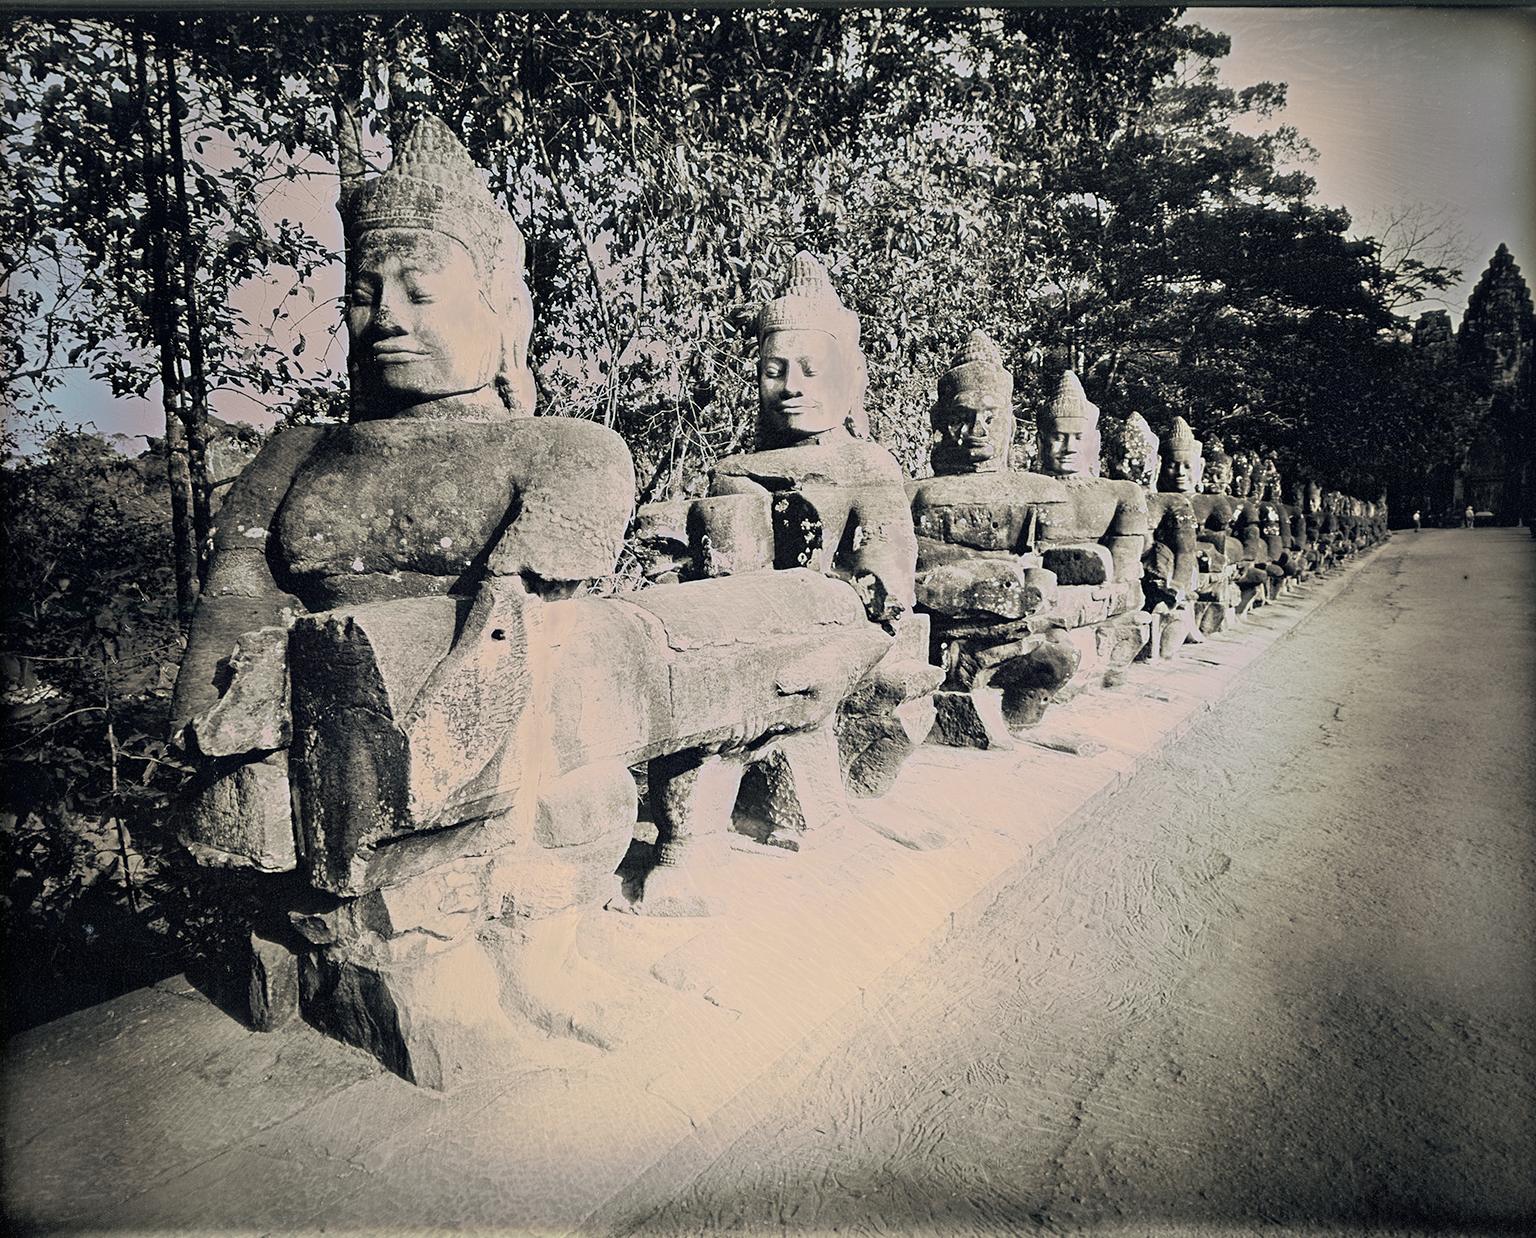 "Entrance to Angkor Thom" daguerreotype on silver buddha statues trees